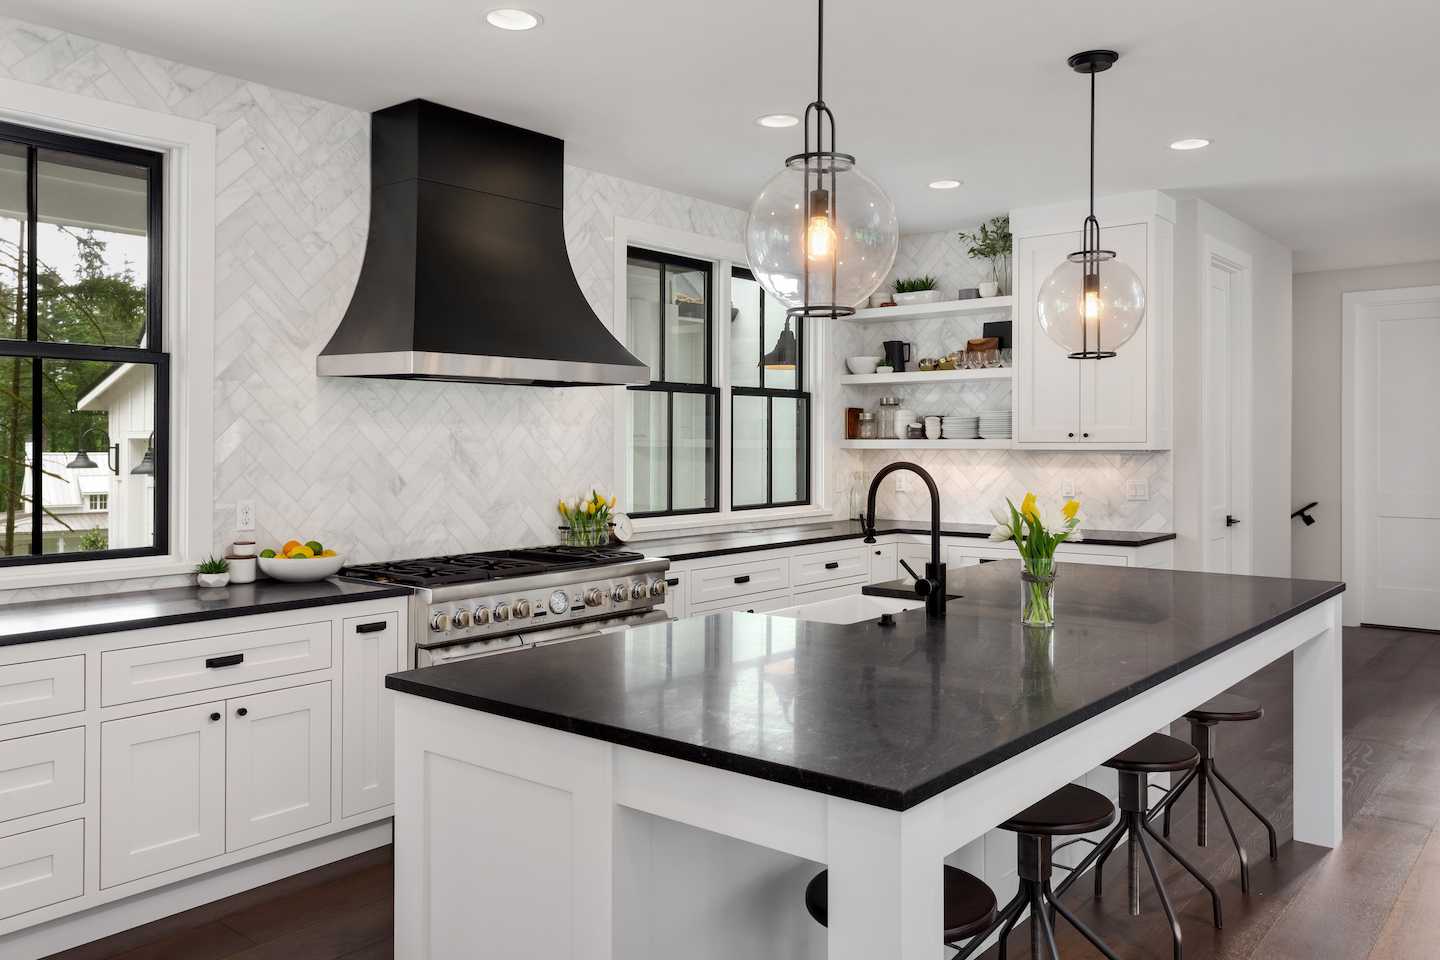 Kitchen Remodeling Ideas in Essex County, NJ